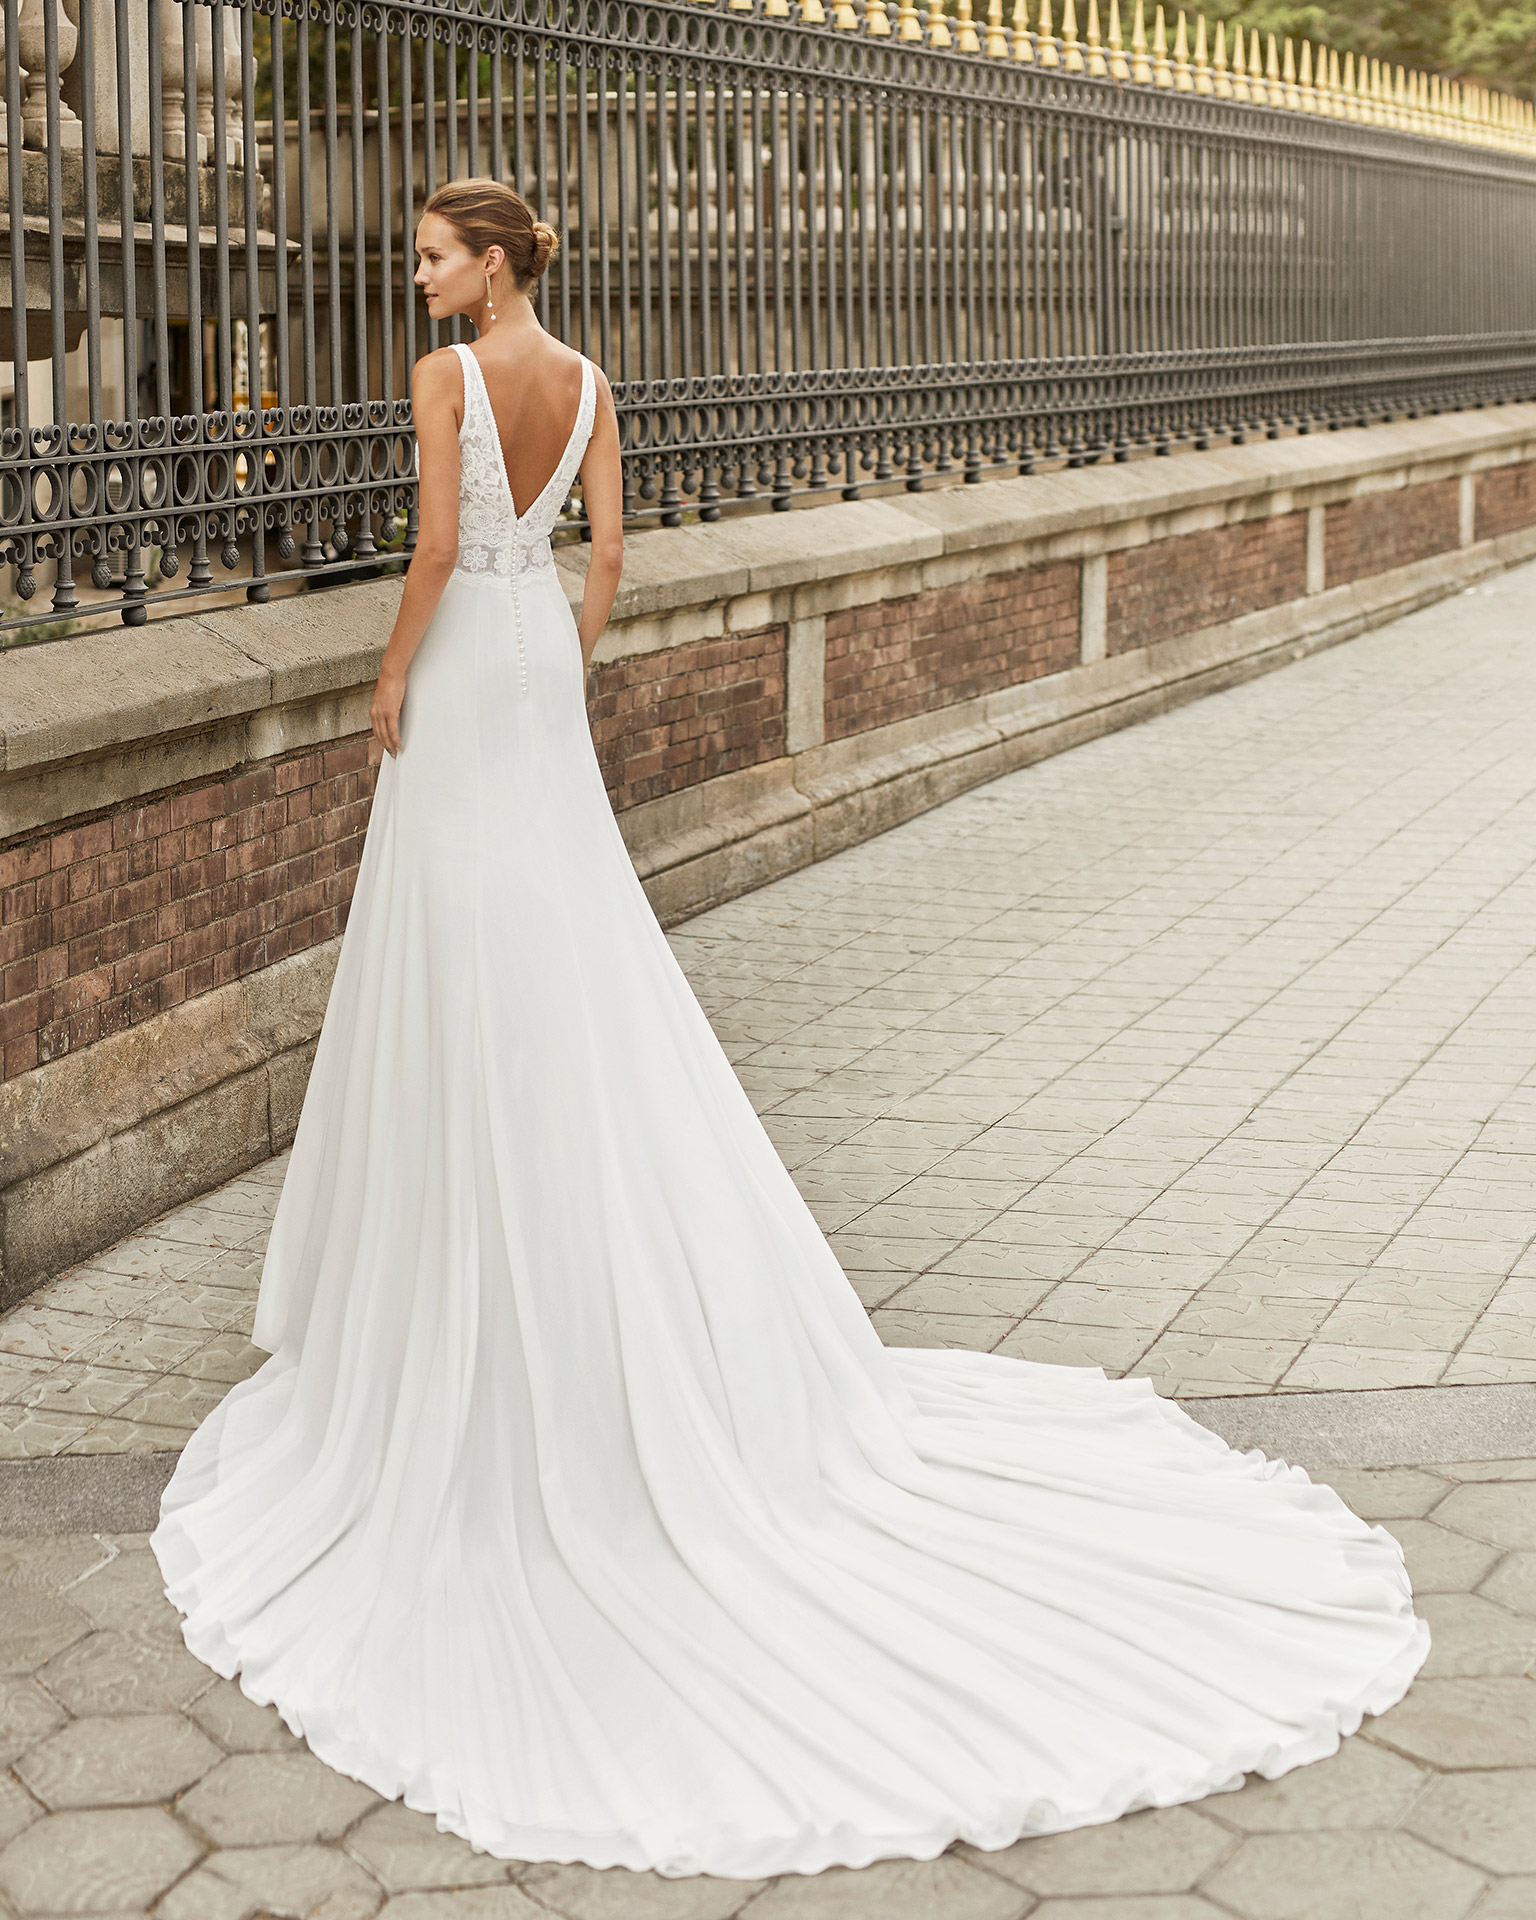 Lightweight wedding dress in georgette and lace. Deep-plunge neckline and V-back. 2022  Collection.